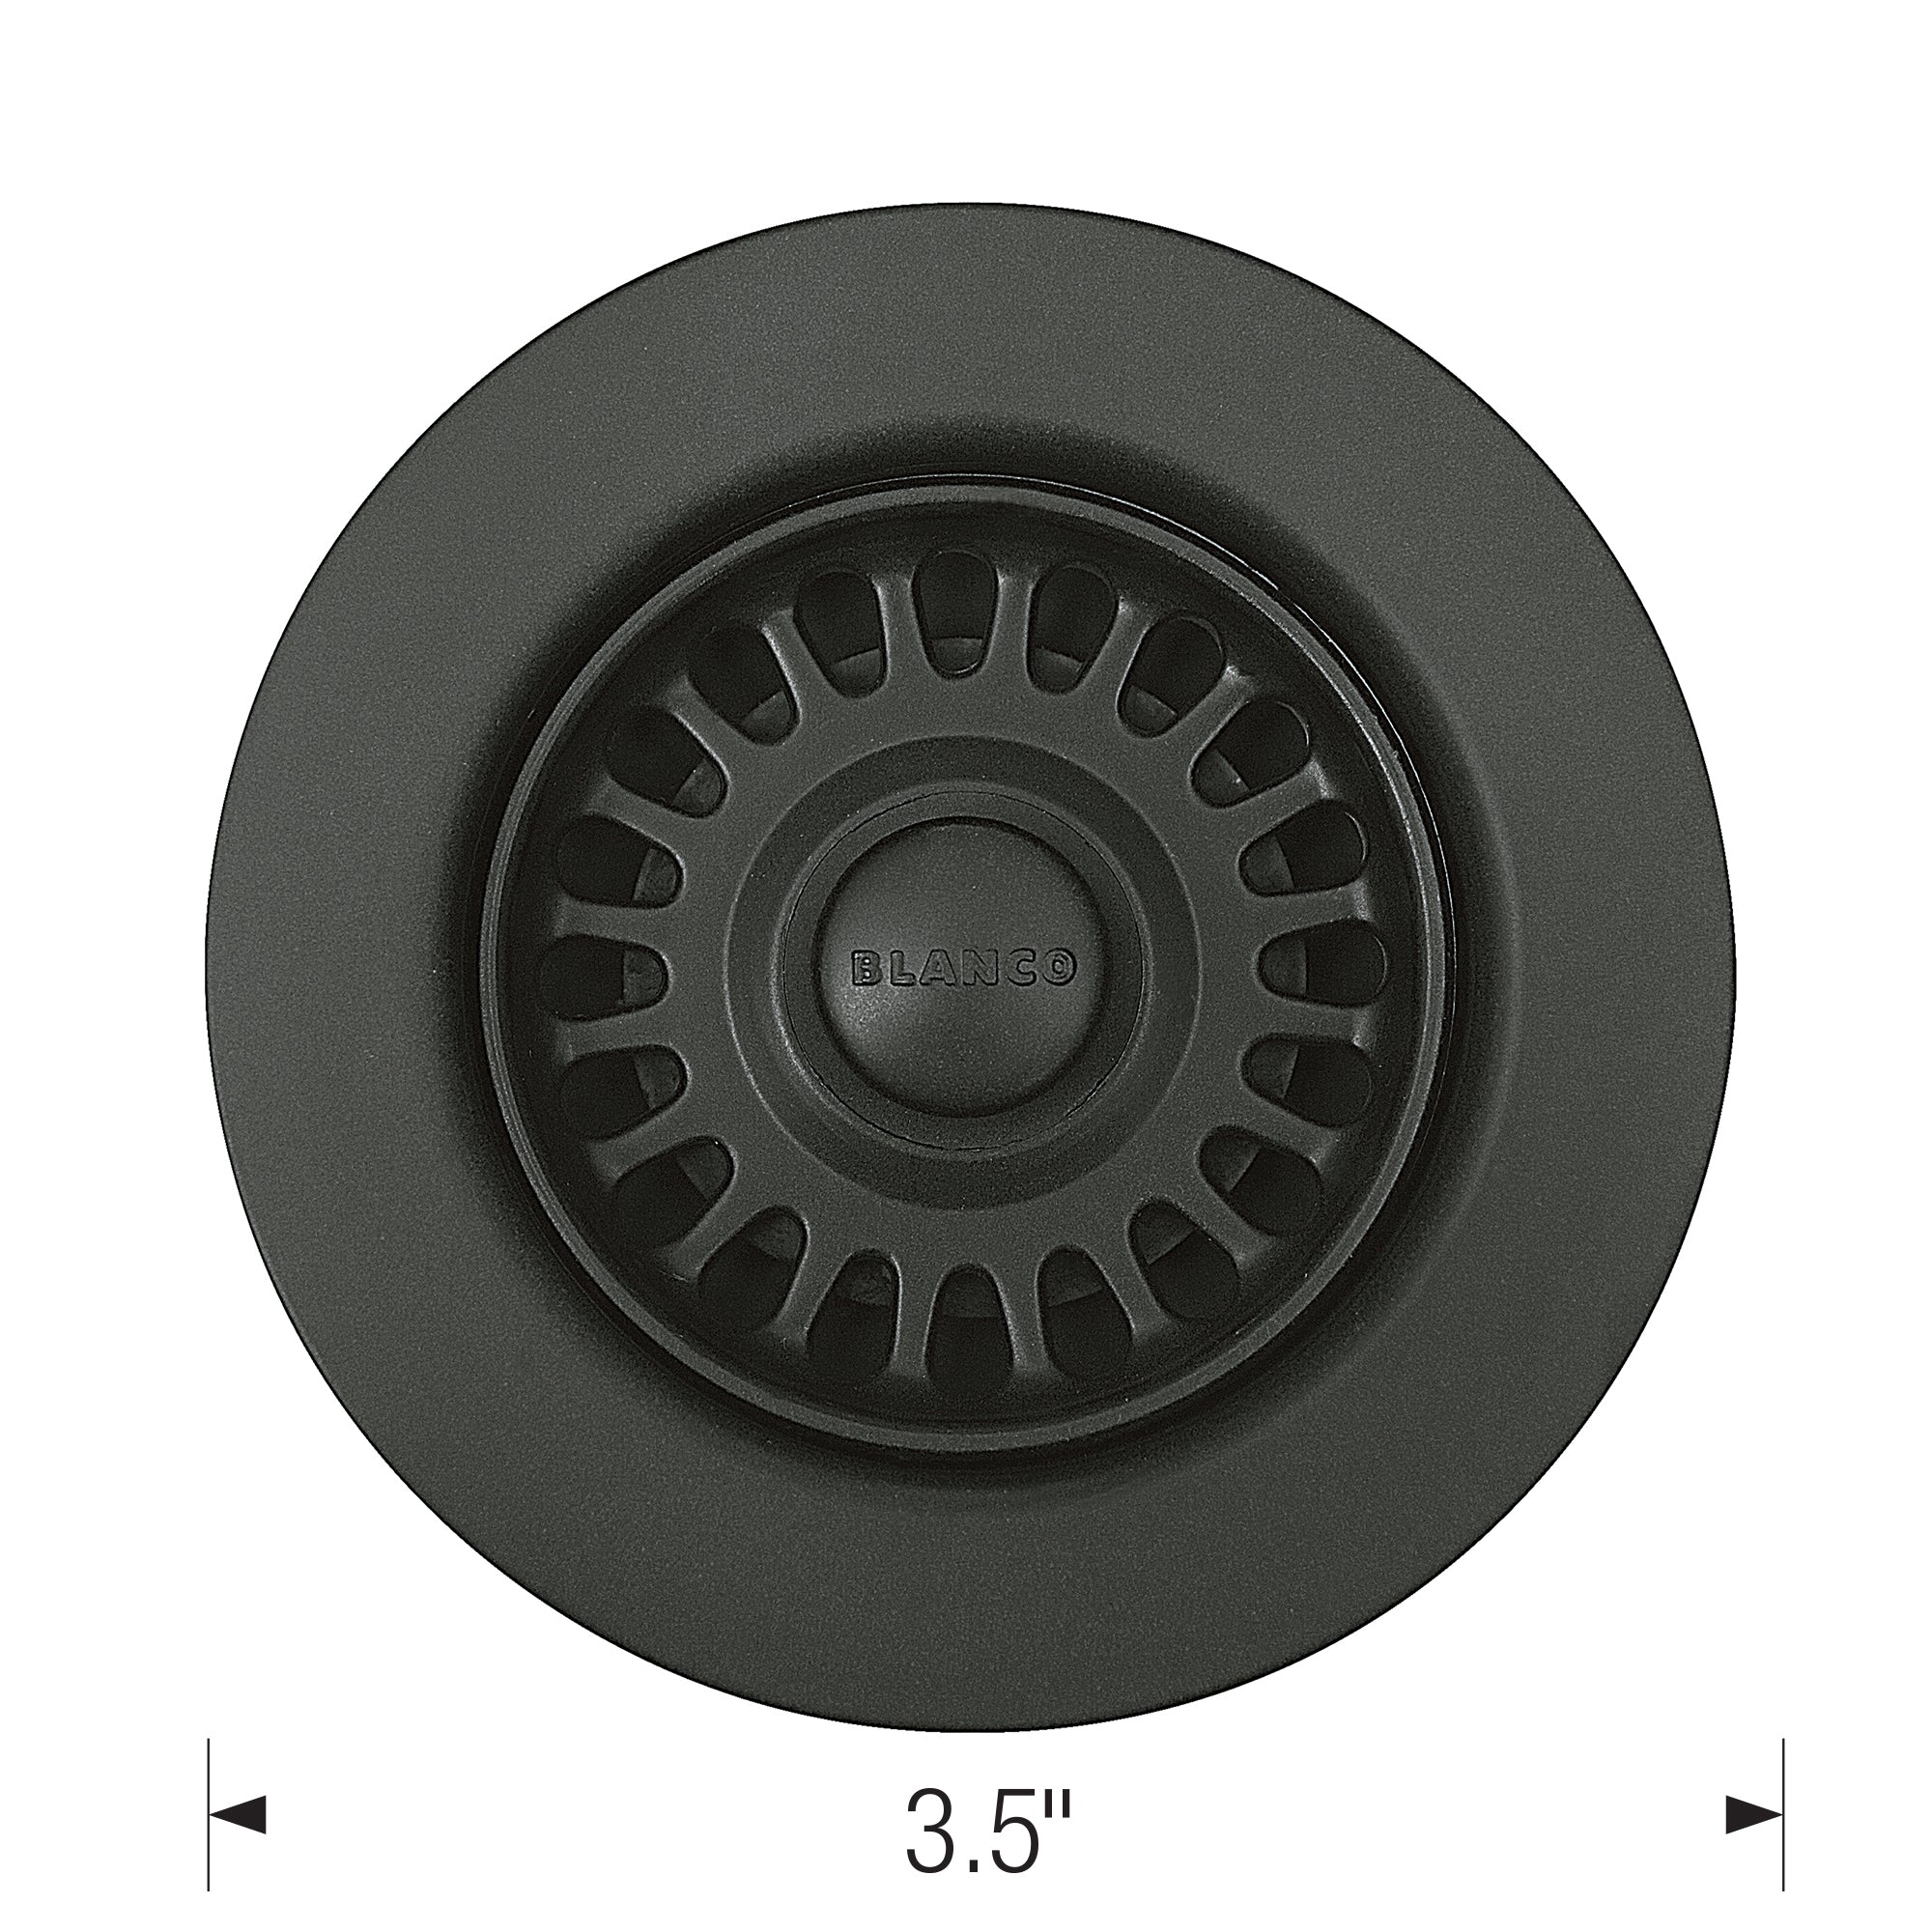 Blanco 240333- Colour-coordinated Metal Waste Flange, Anthracite - FaucetExpress.ca